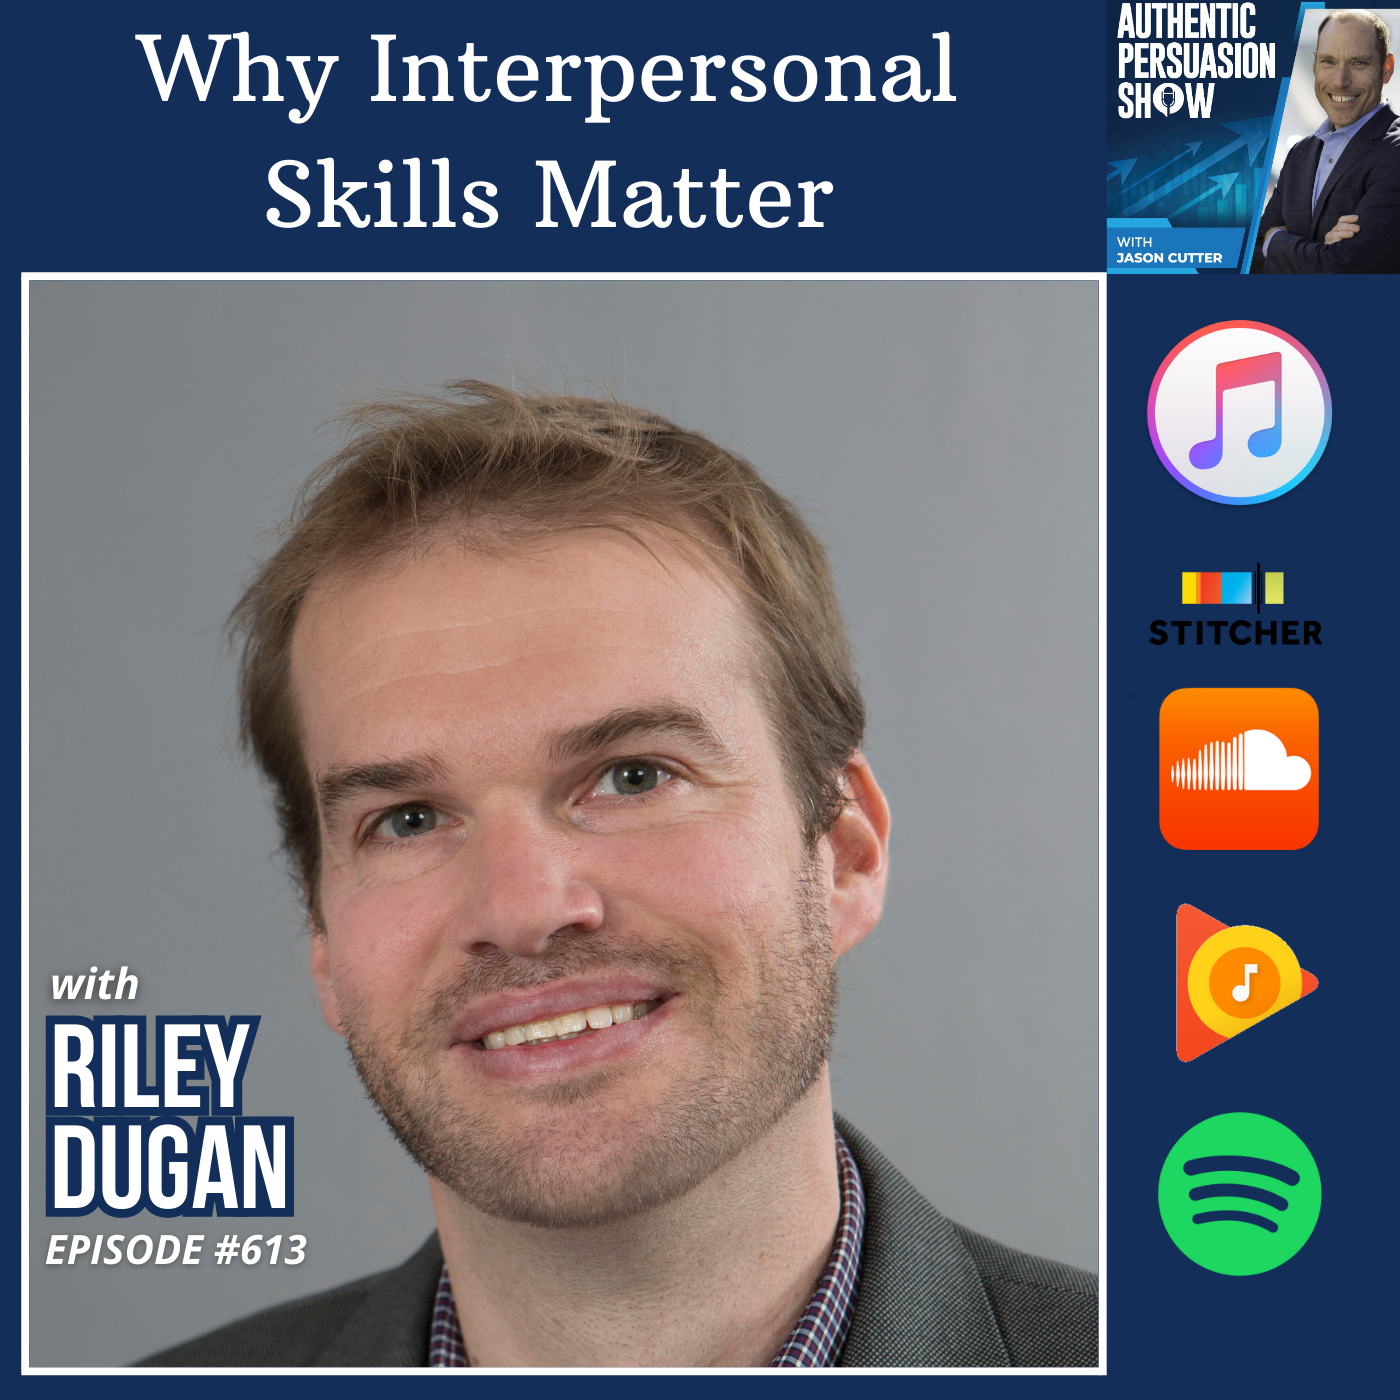 [613] Why Interpersonal Skills Matter, with Dr. Riley Dugan from the University of Dayton